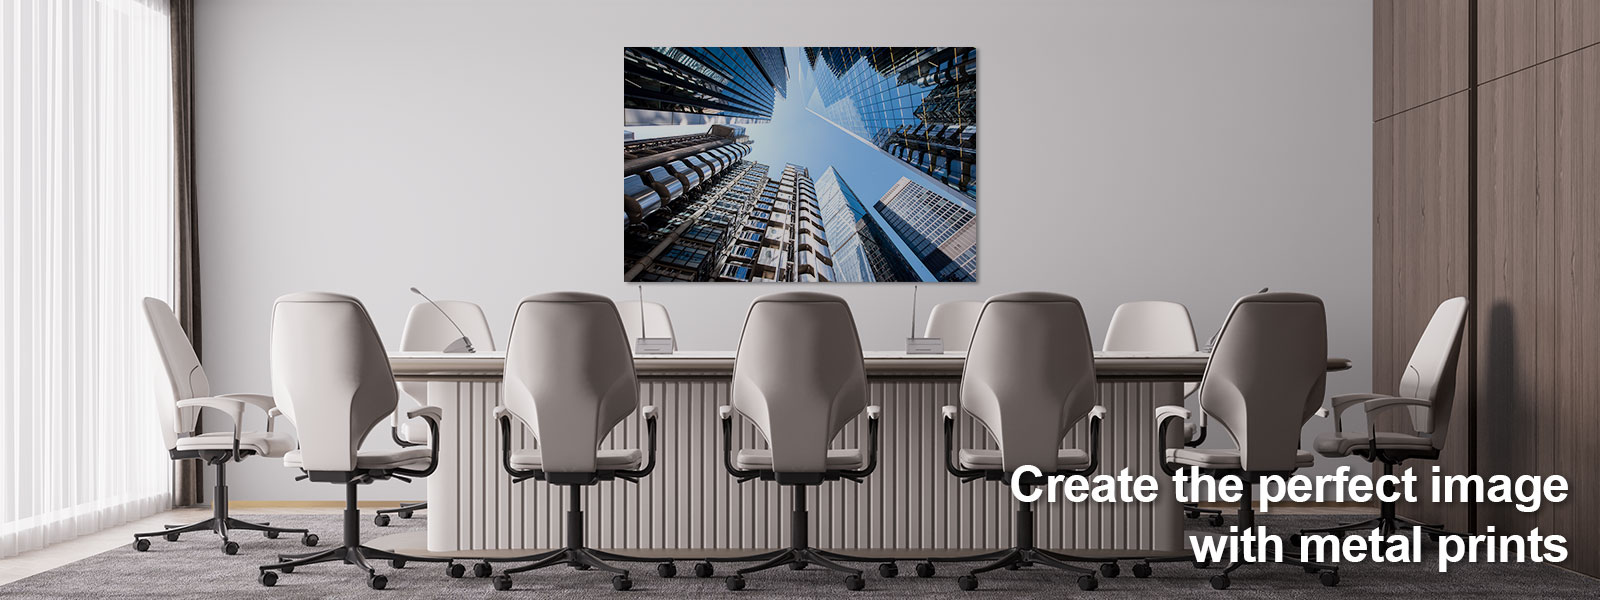 Photo of metal print in corporate office setting